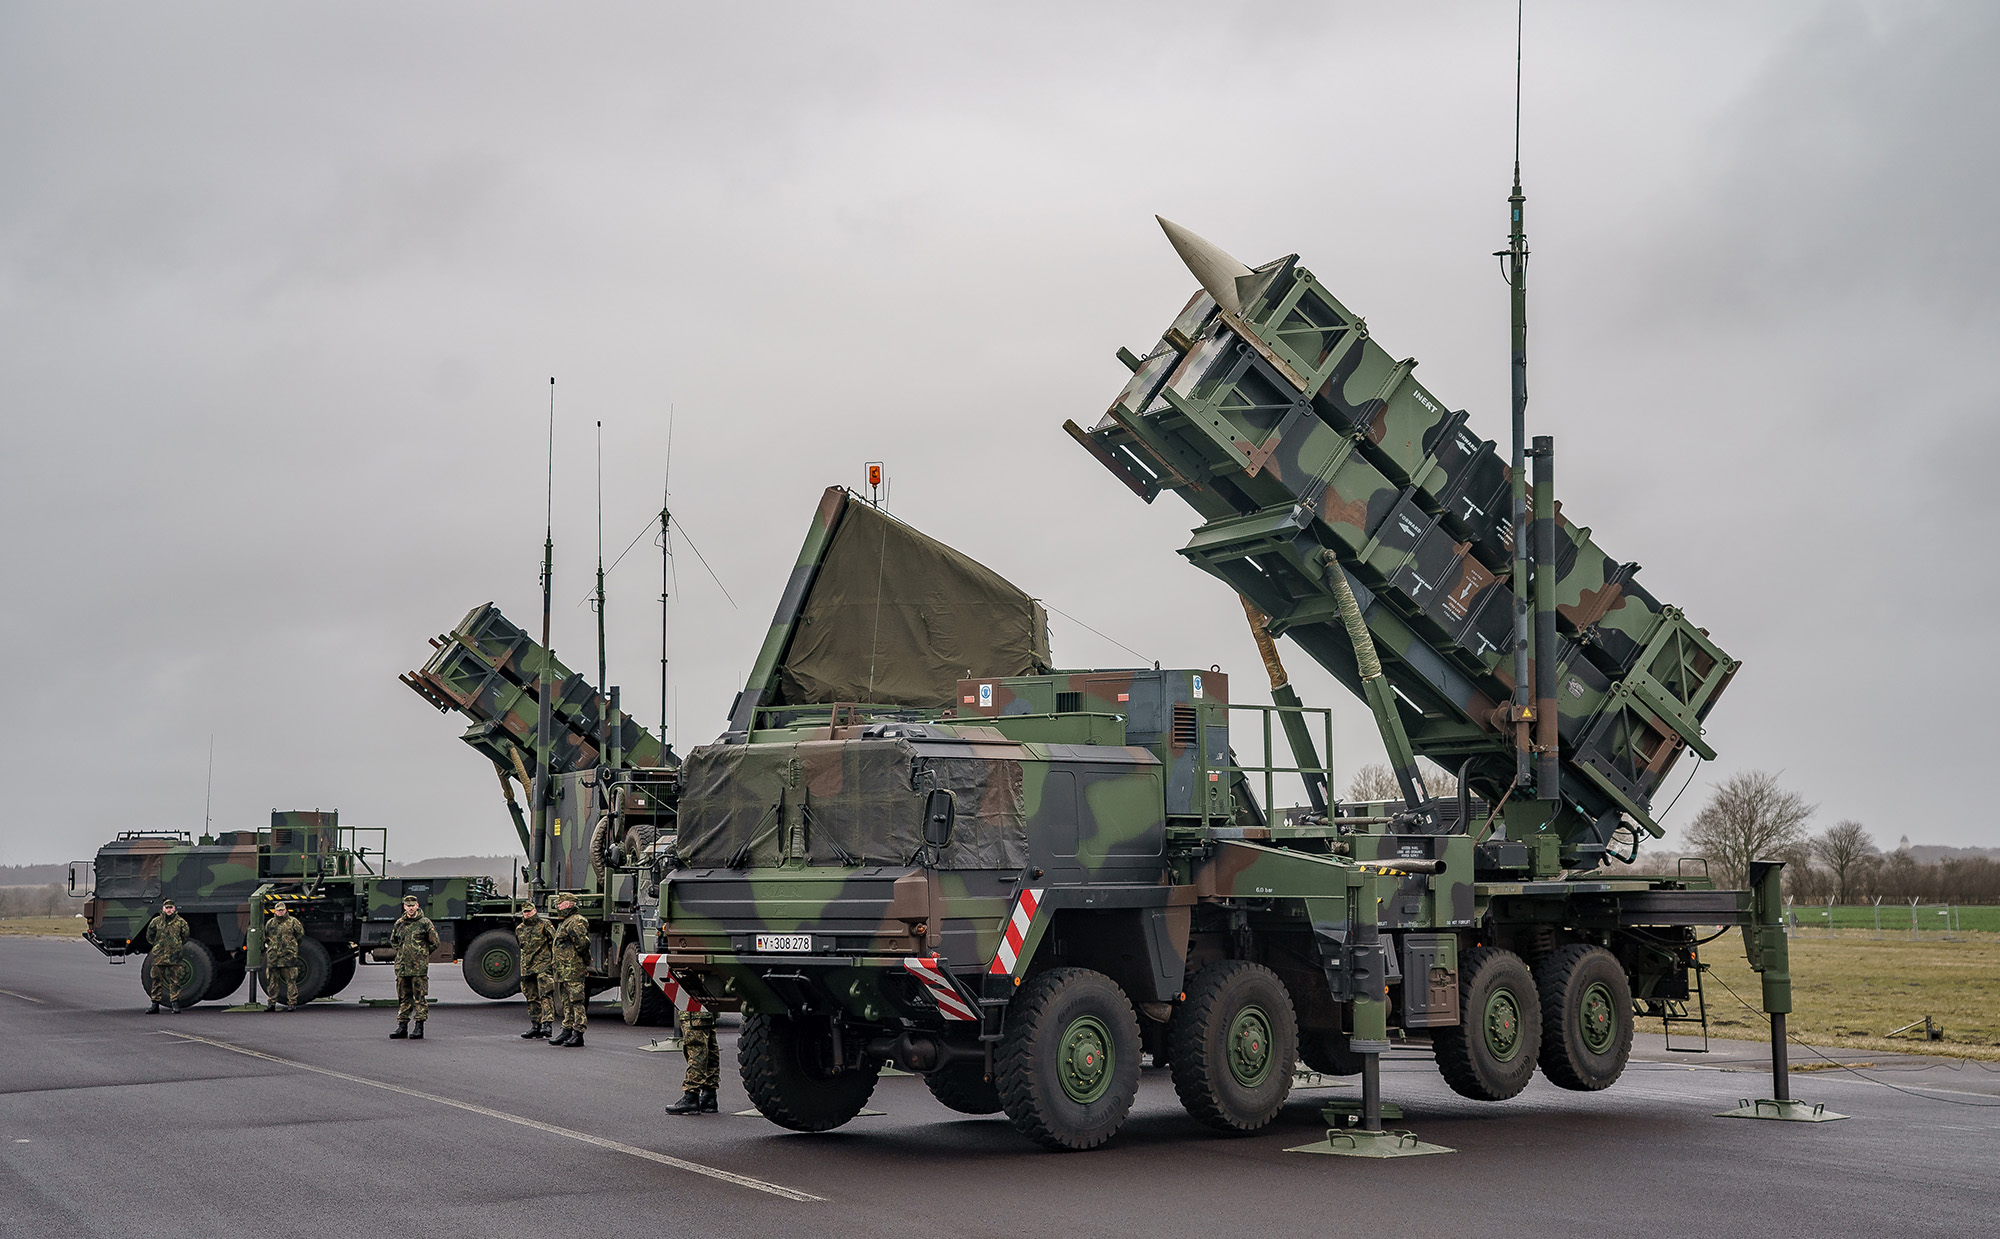 Patriot anti-aircraft missile systems of the Bundeswehr's 1 anti-aircraft missile squadron were on the airfield of the military airport in Schwesing, Germany, on March 17.